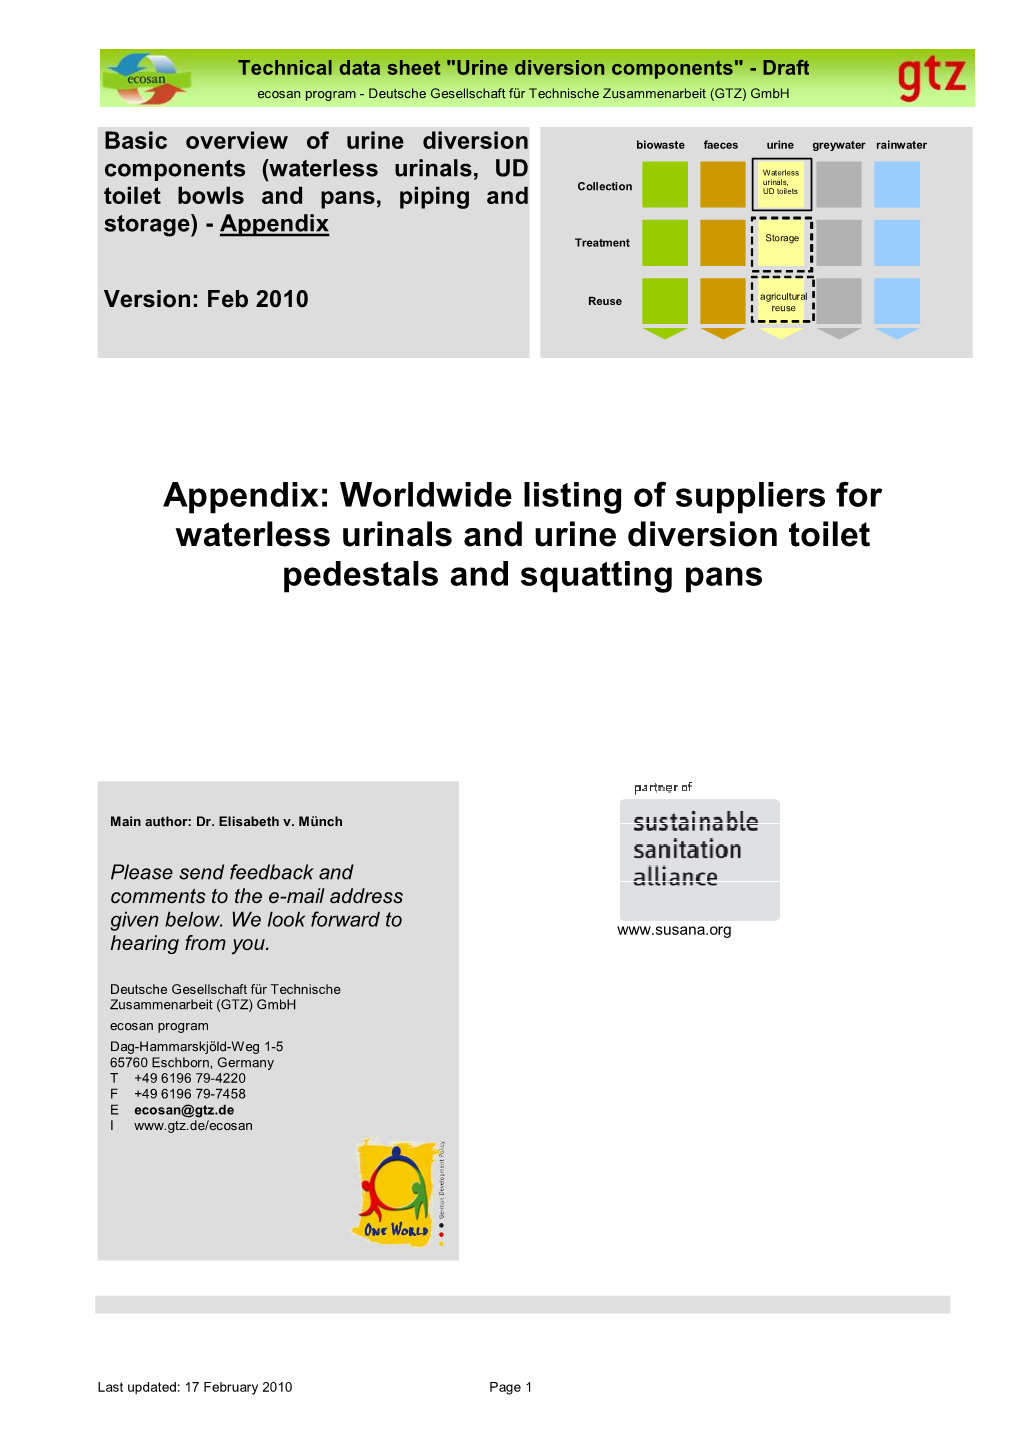 Appendix: Worldwide Listing of Suppliers for Waterless Urinals and Urine Diversion Toilet Pedestals and Squatting Pans